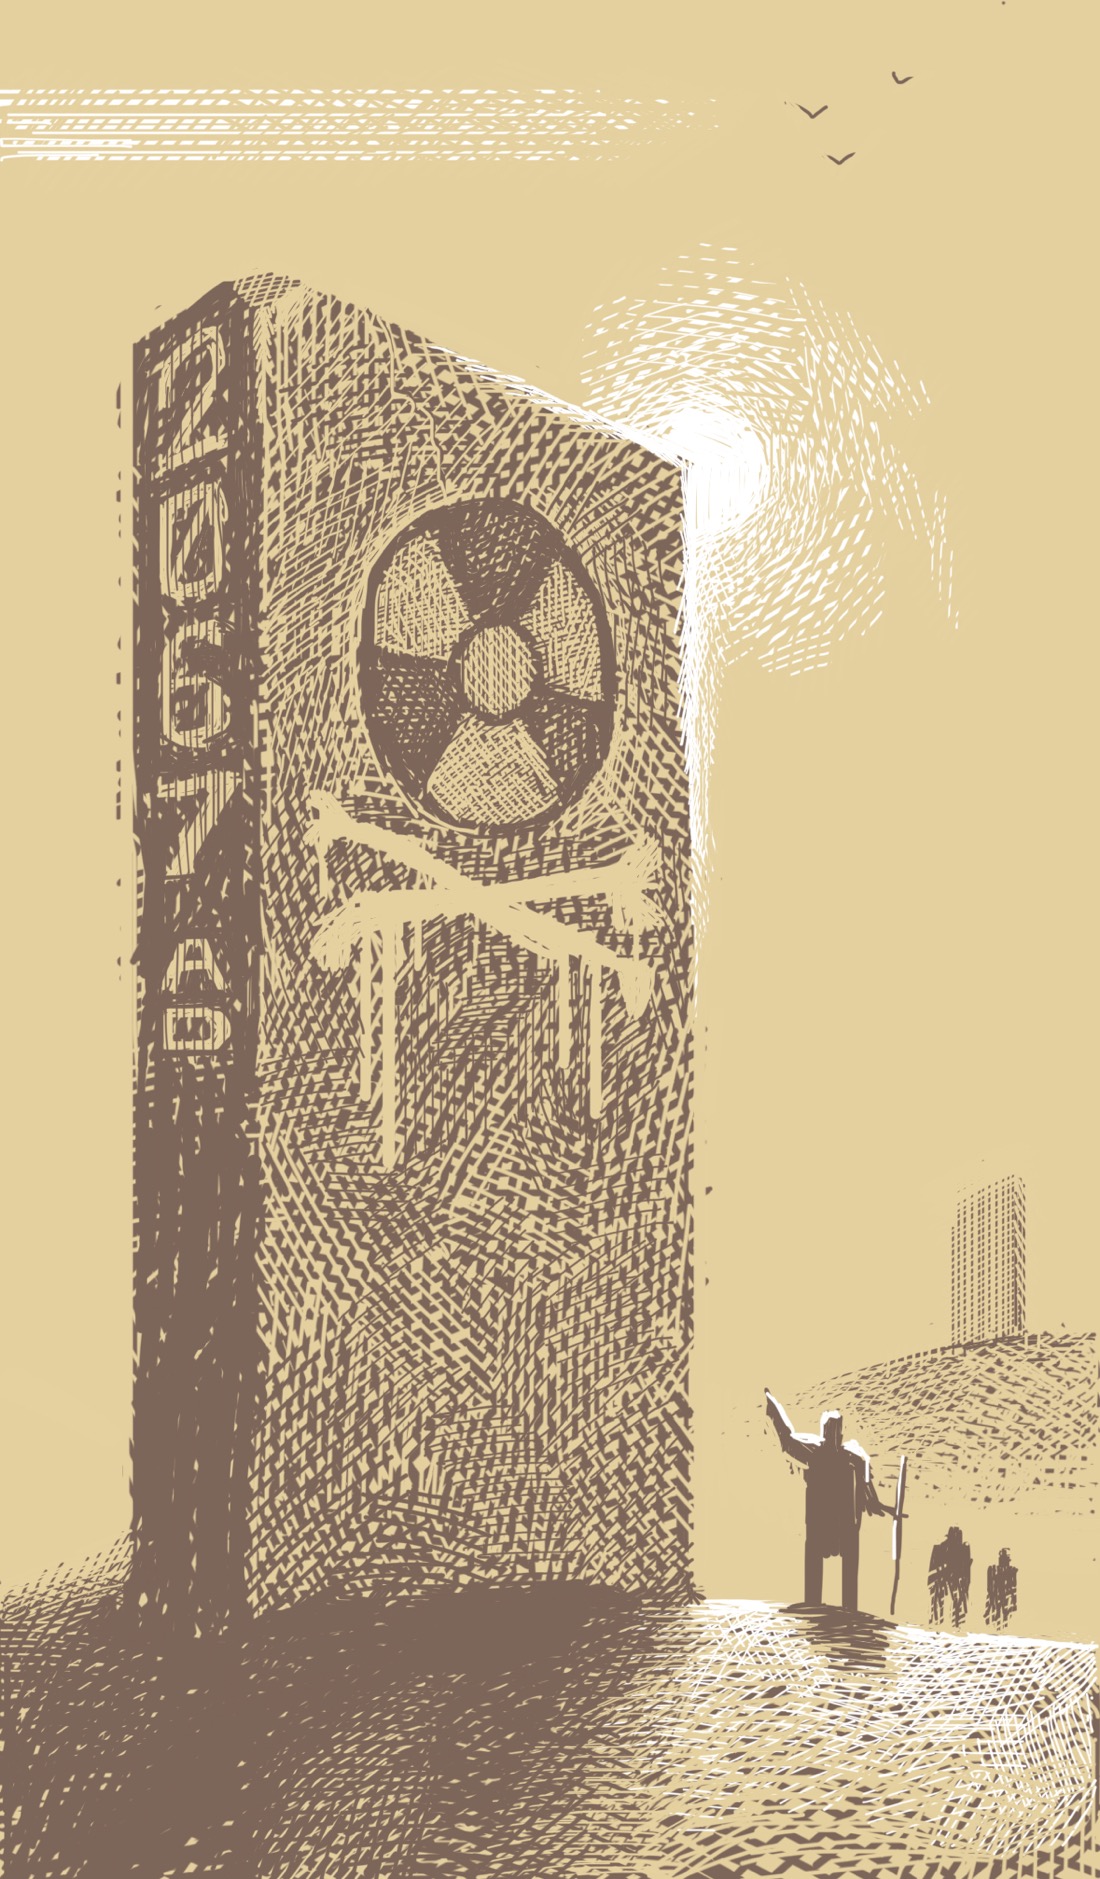 A vast rectangular monolith rises out of the desert. On the front of it is the symbol for radioactivity, with a crudely painted horizontal X directly underneath; the overall effect suggests a skull and crossbones. On the side of the monolith is inscribed, vertically, "2067 AD". The sun is partially blocked by the top right corner of the monolith. In front of it, three small figures—desert wanderers, from the looks of them—congregate in front of the monolith. One gestures to it. The characters on the side are meaningless to them, but they have come to know one thing: the dot with the three rays emanating from it signifies one of the bad places; the stretches of desert that, for thousands of years, are known to be cursed.